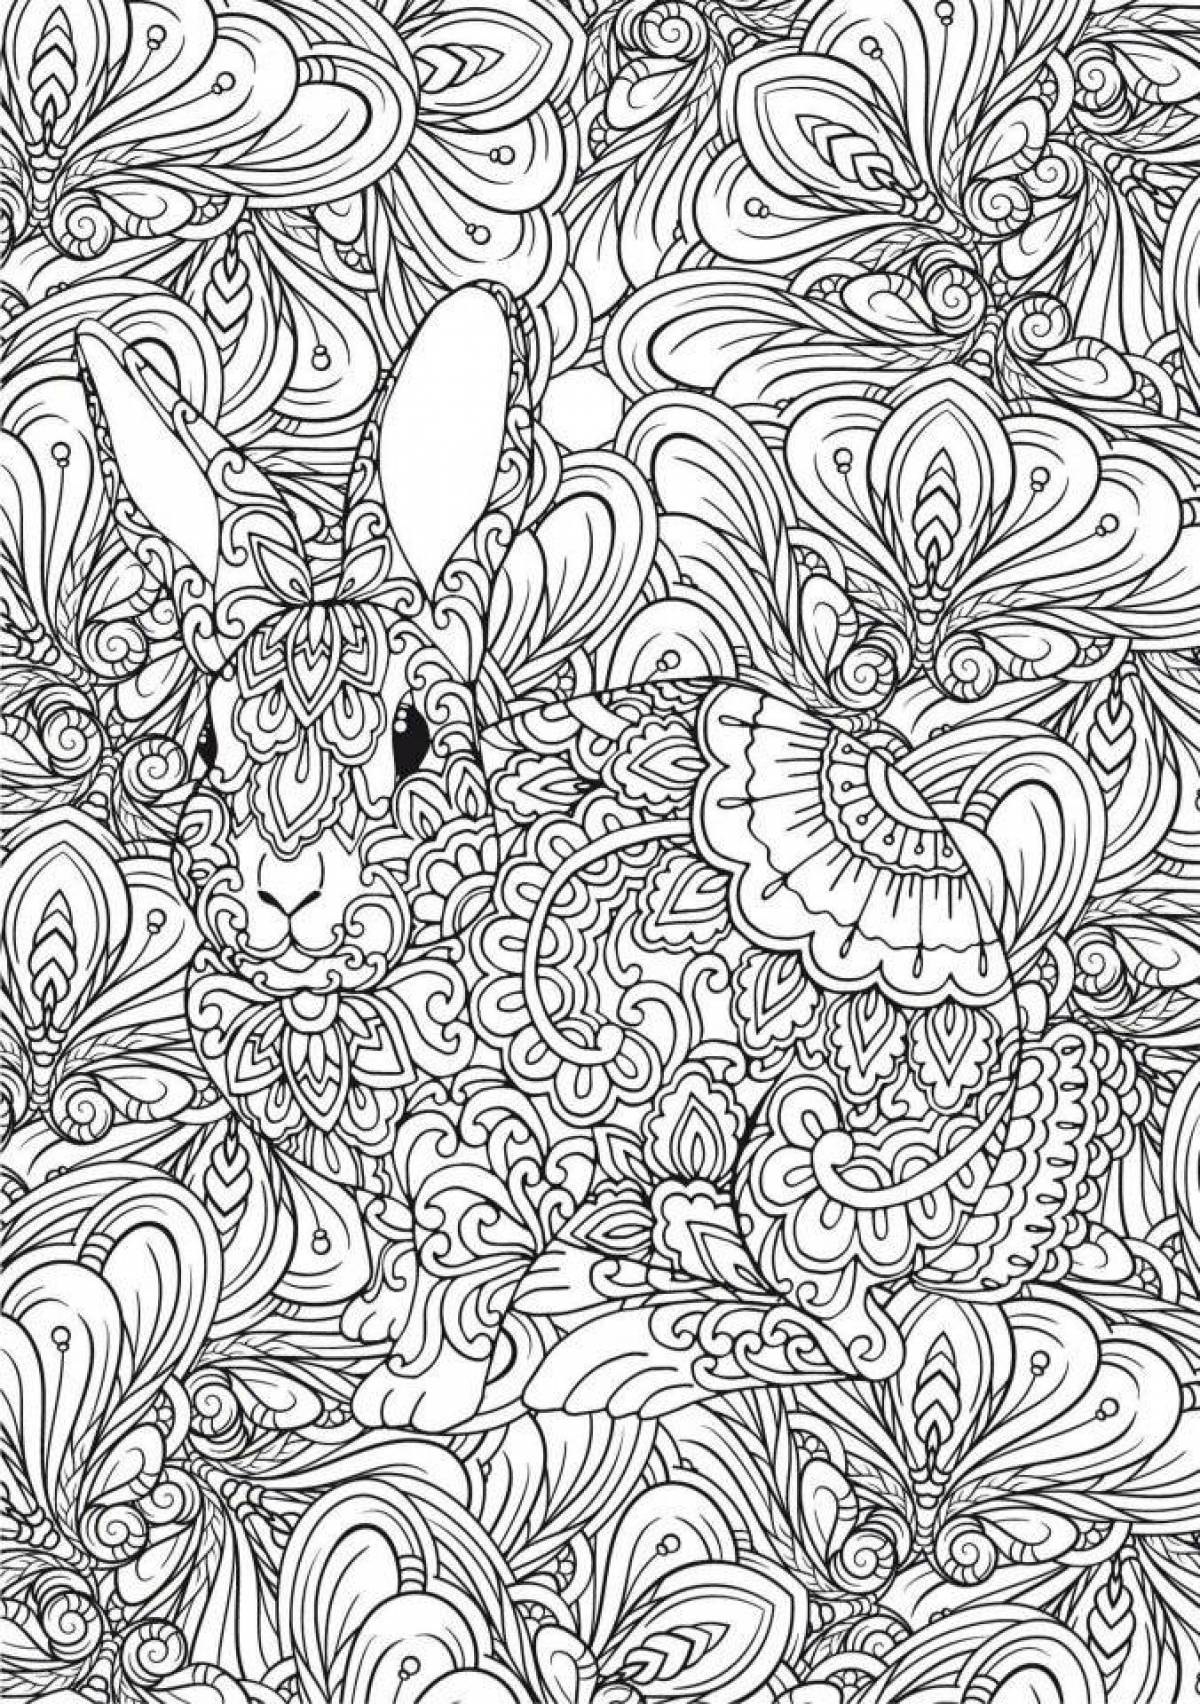 Invigorating anti-stress coloring book for adults